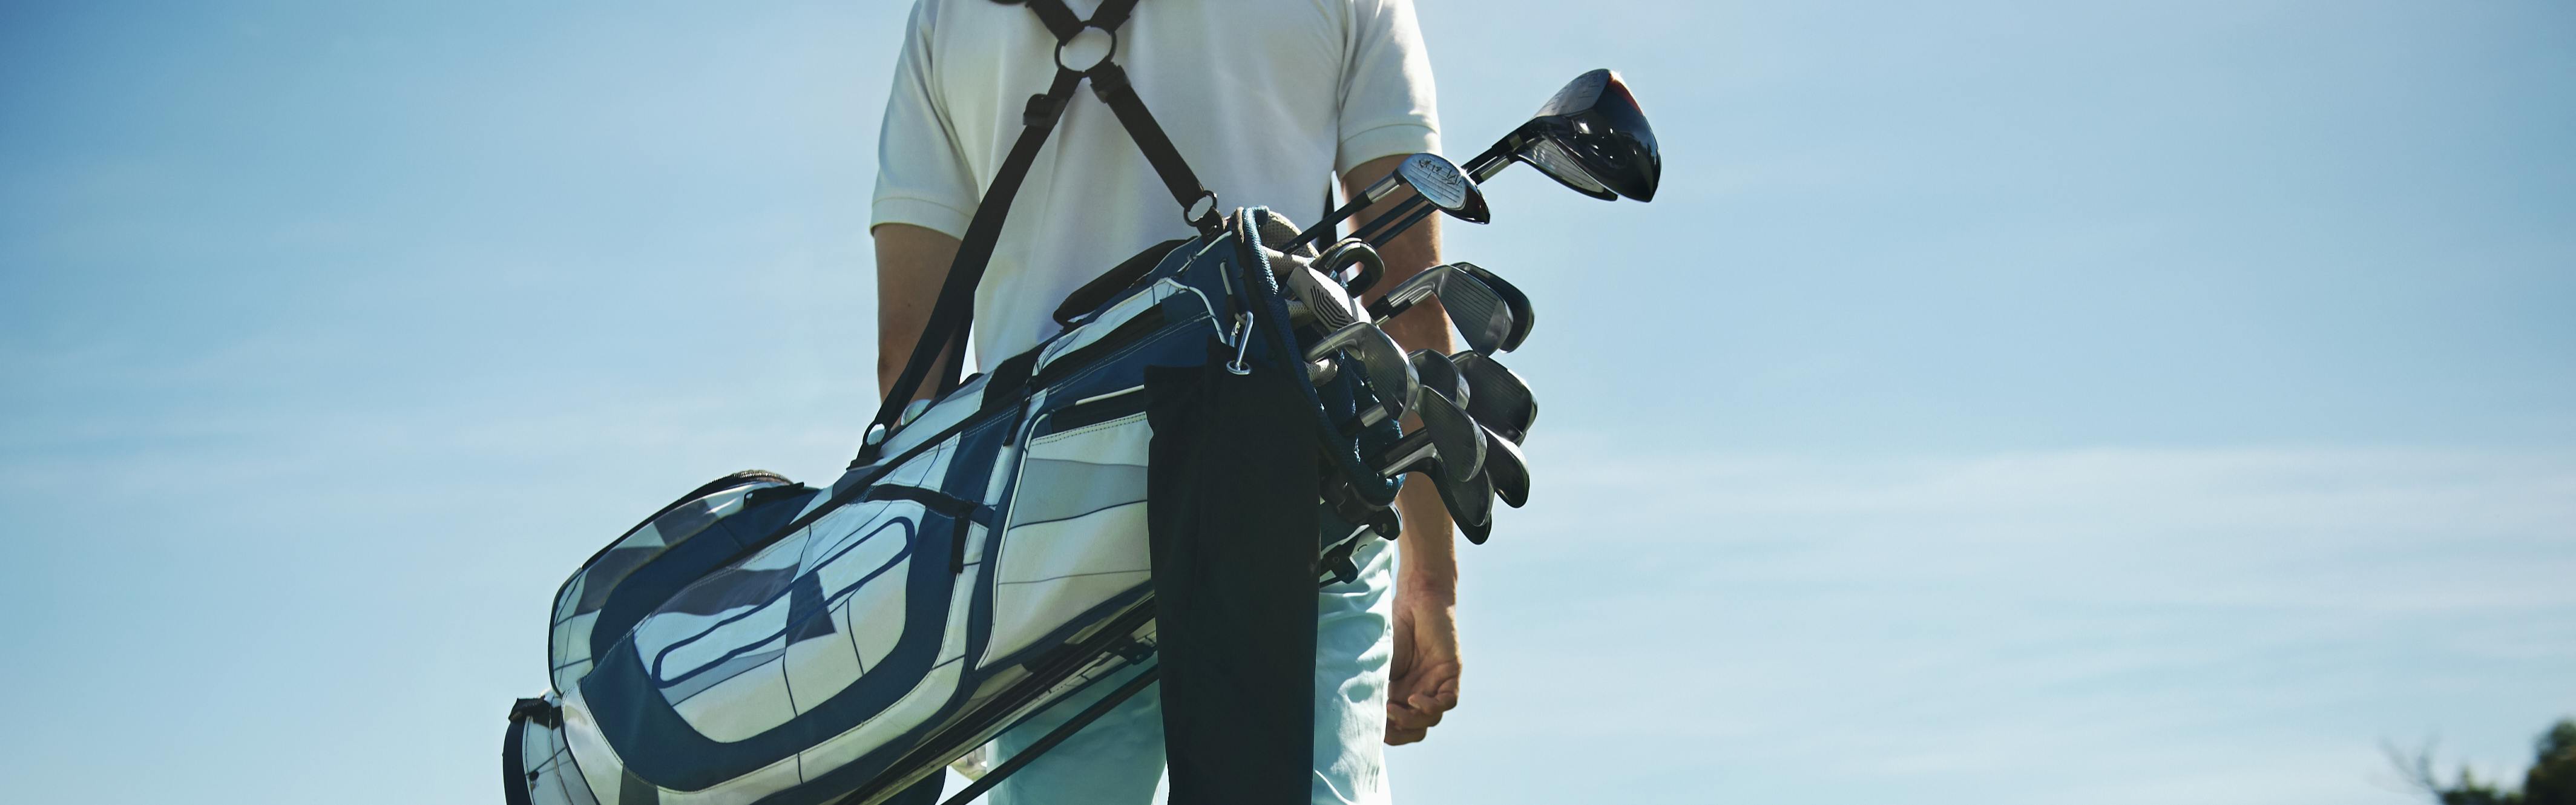 Back view of someone carrying a golf bag with clubs in it. 